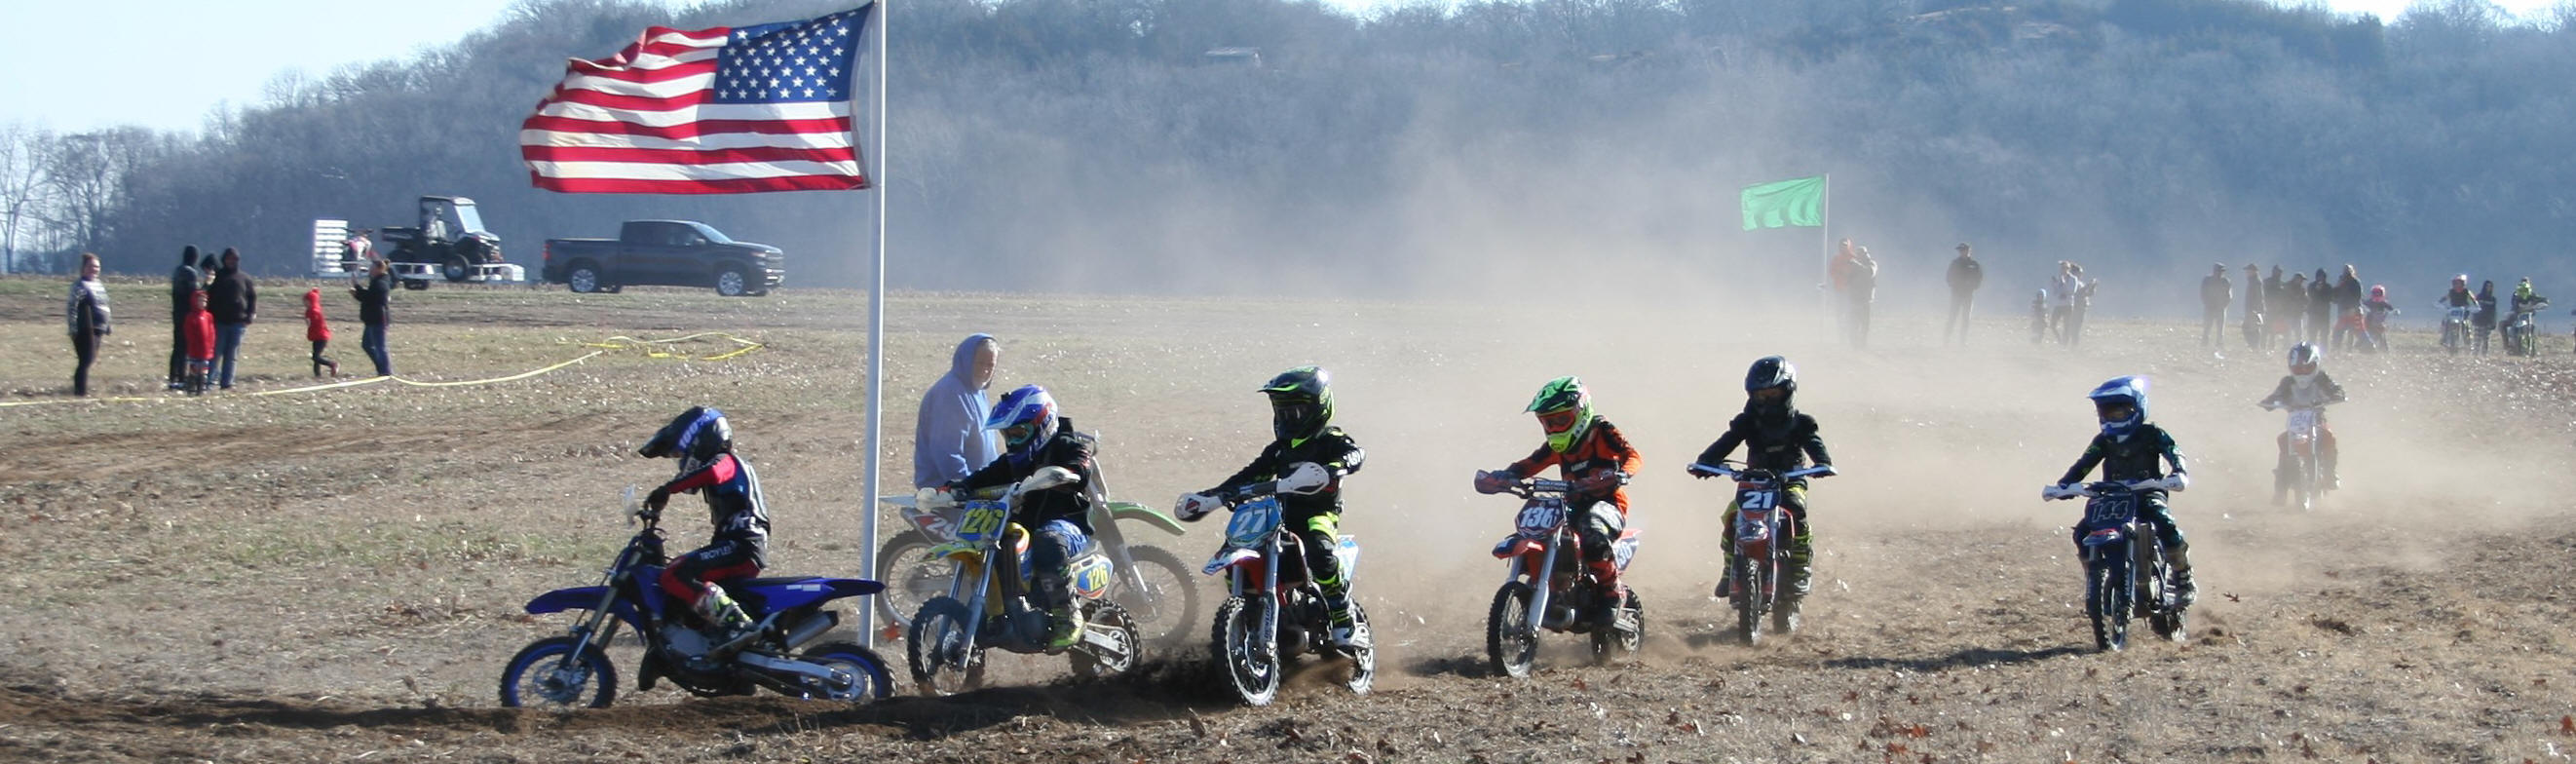 May be an image of 12 people, motorcycle and dirt bike